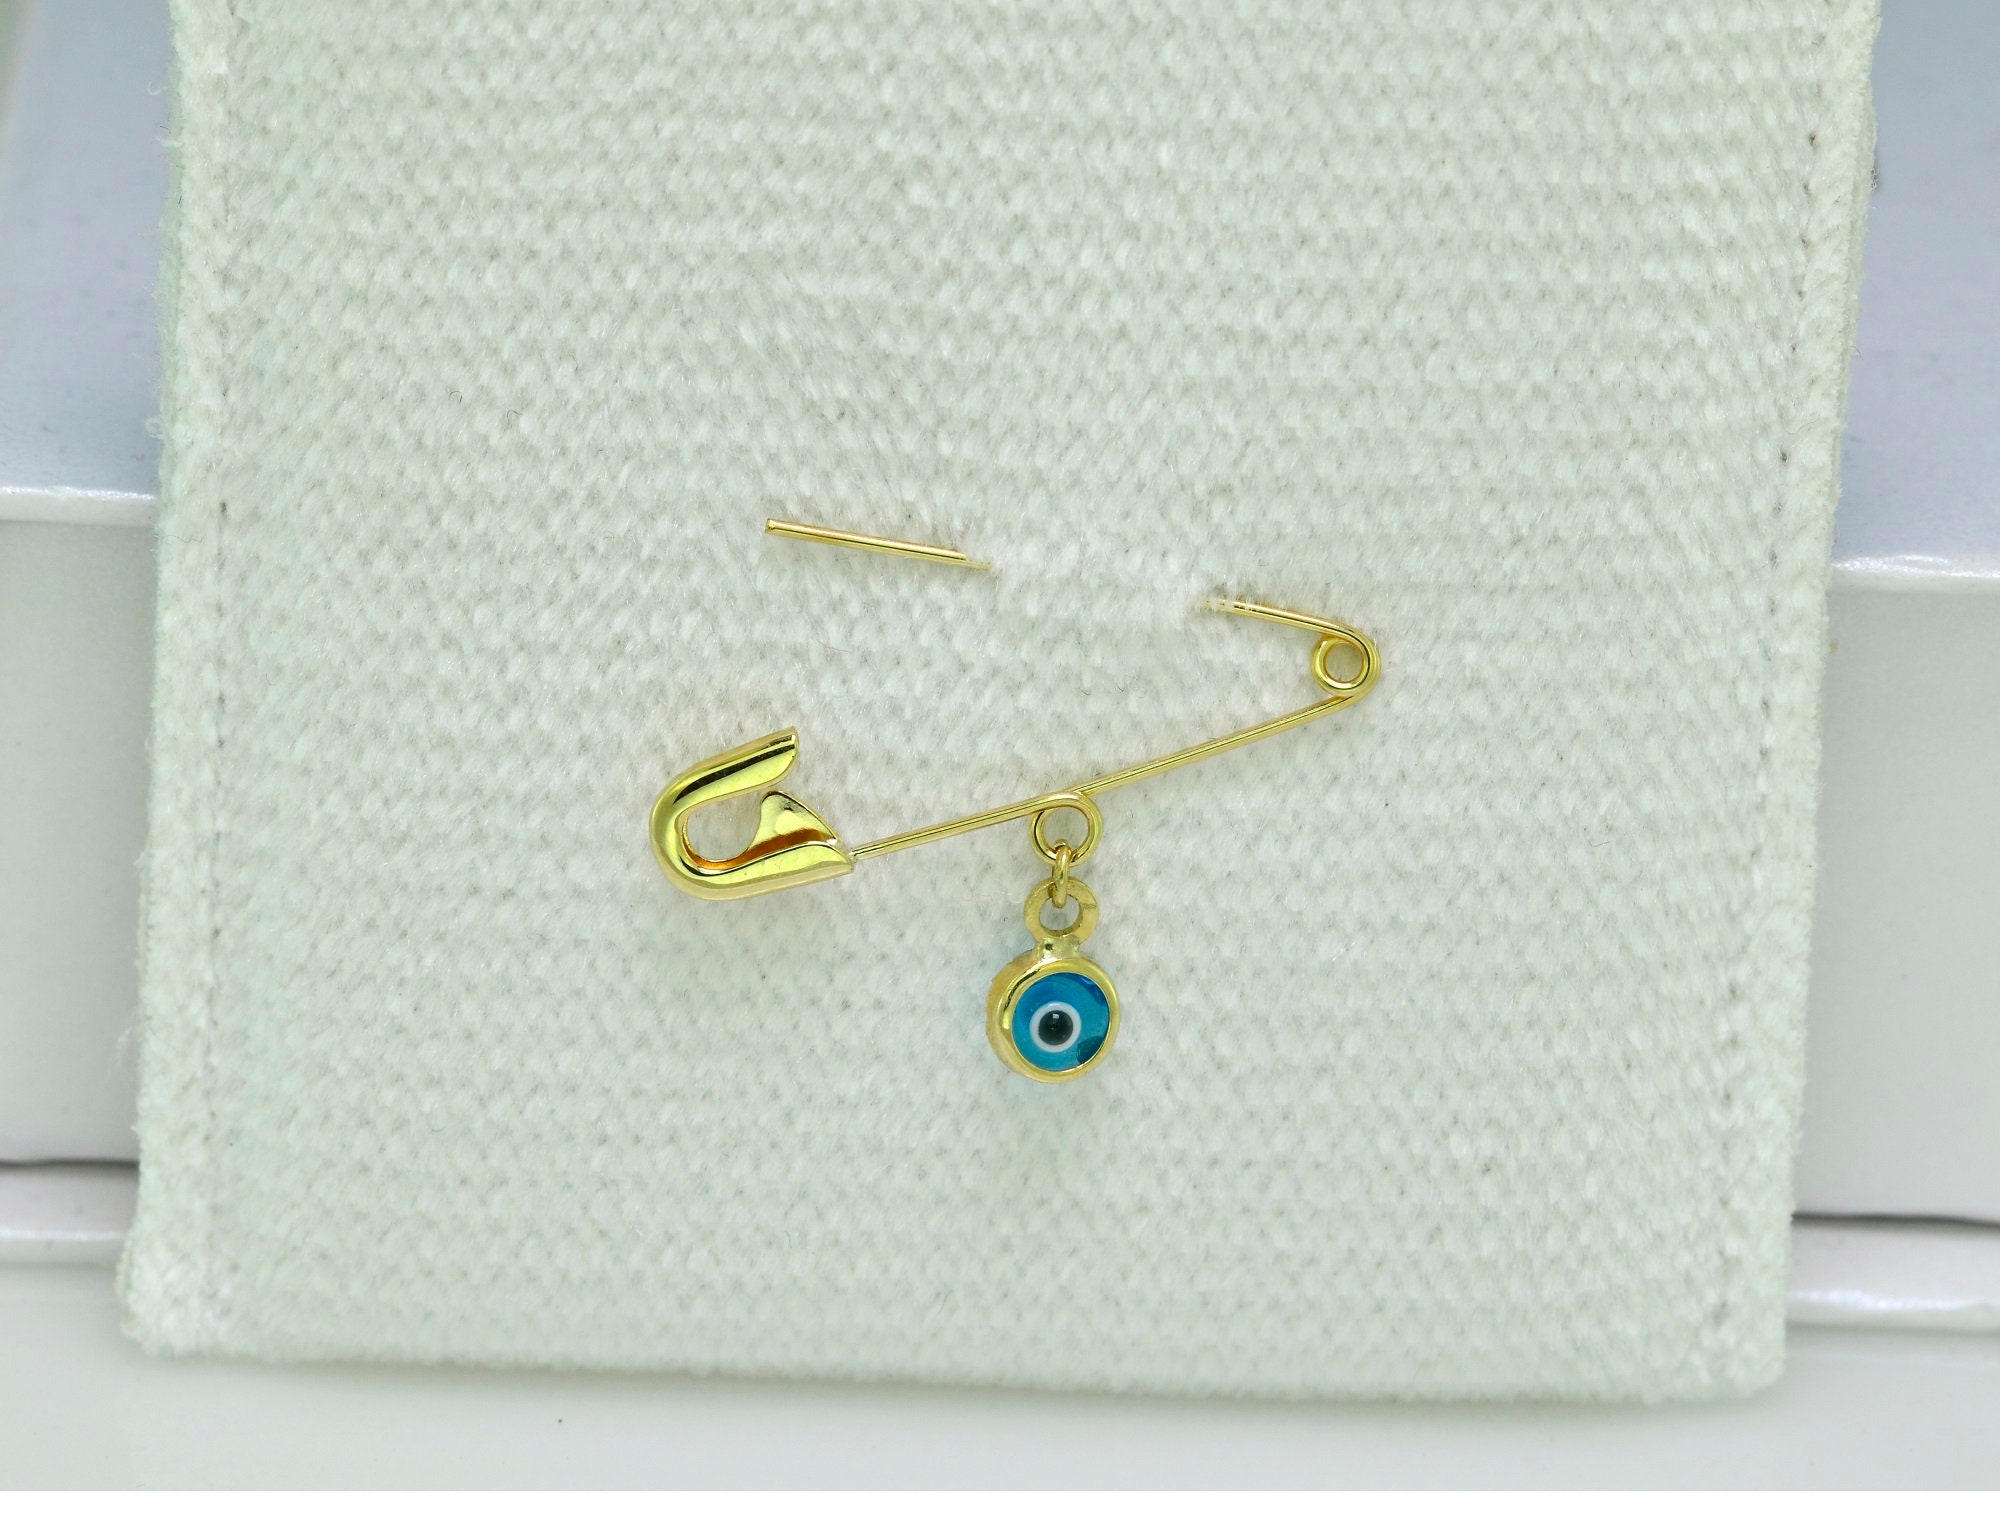 14 KT Diaper Pin with glass eye charm.